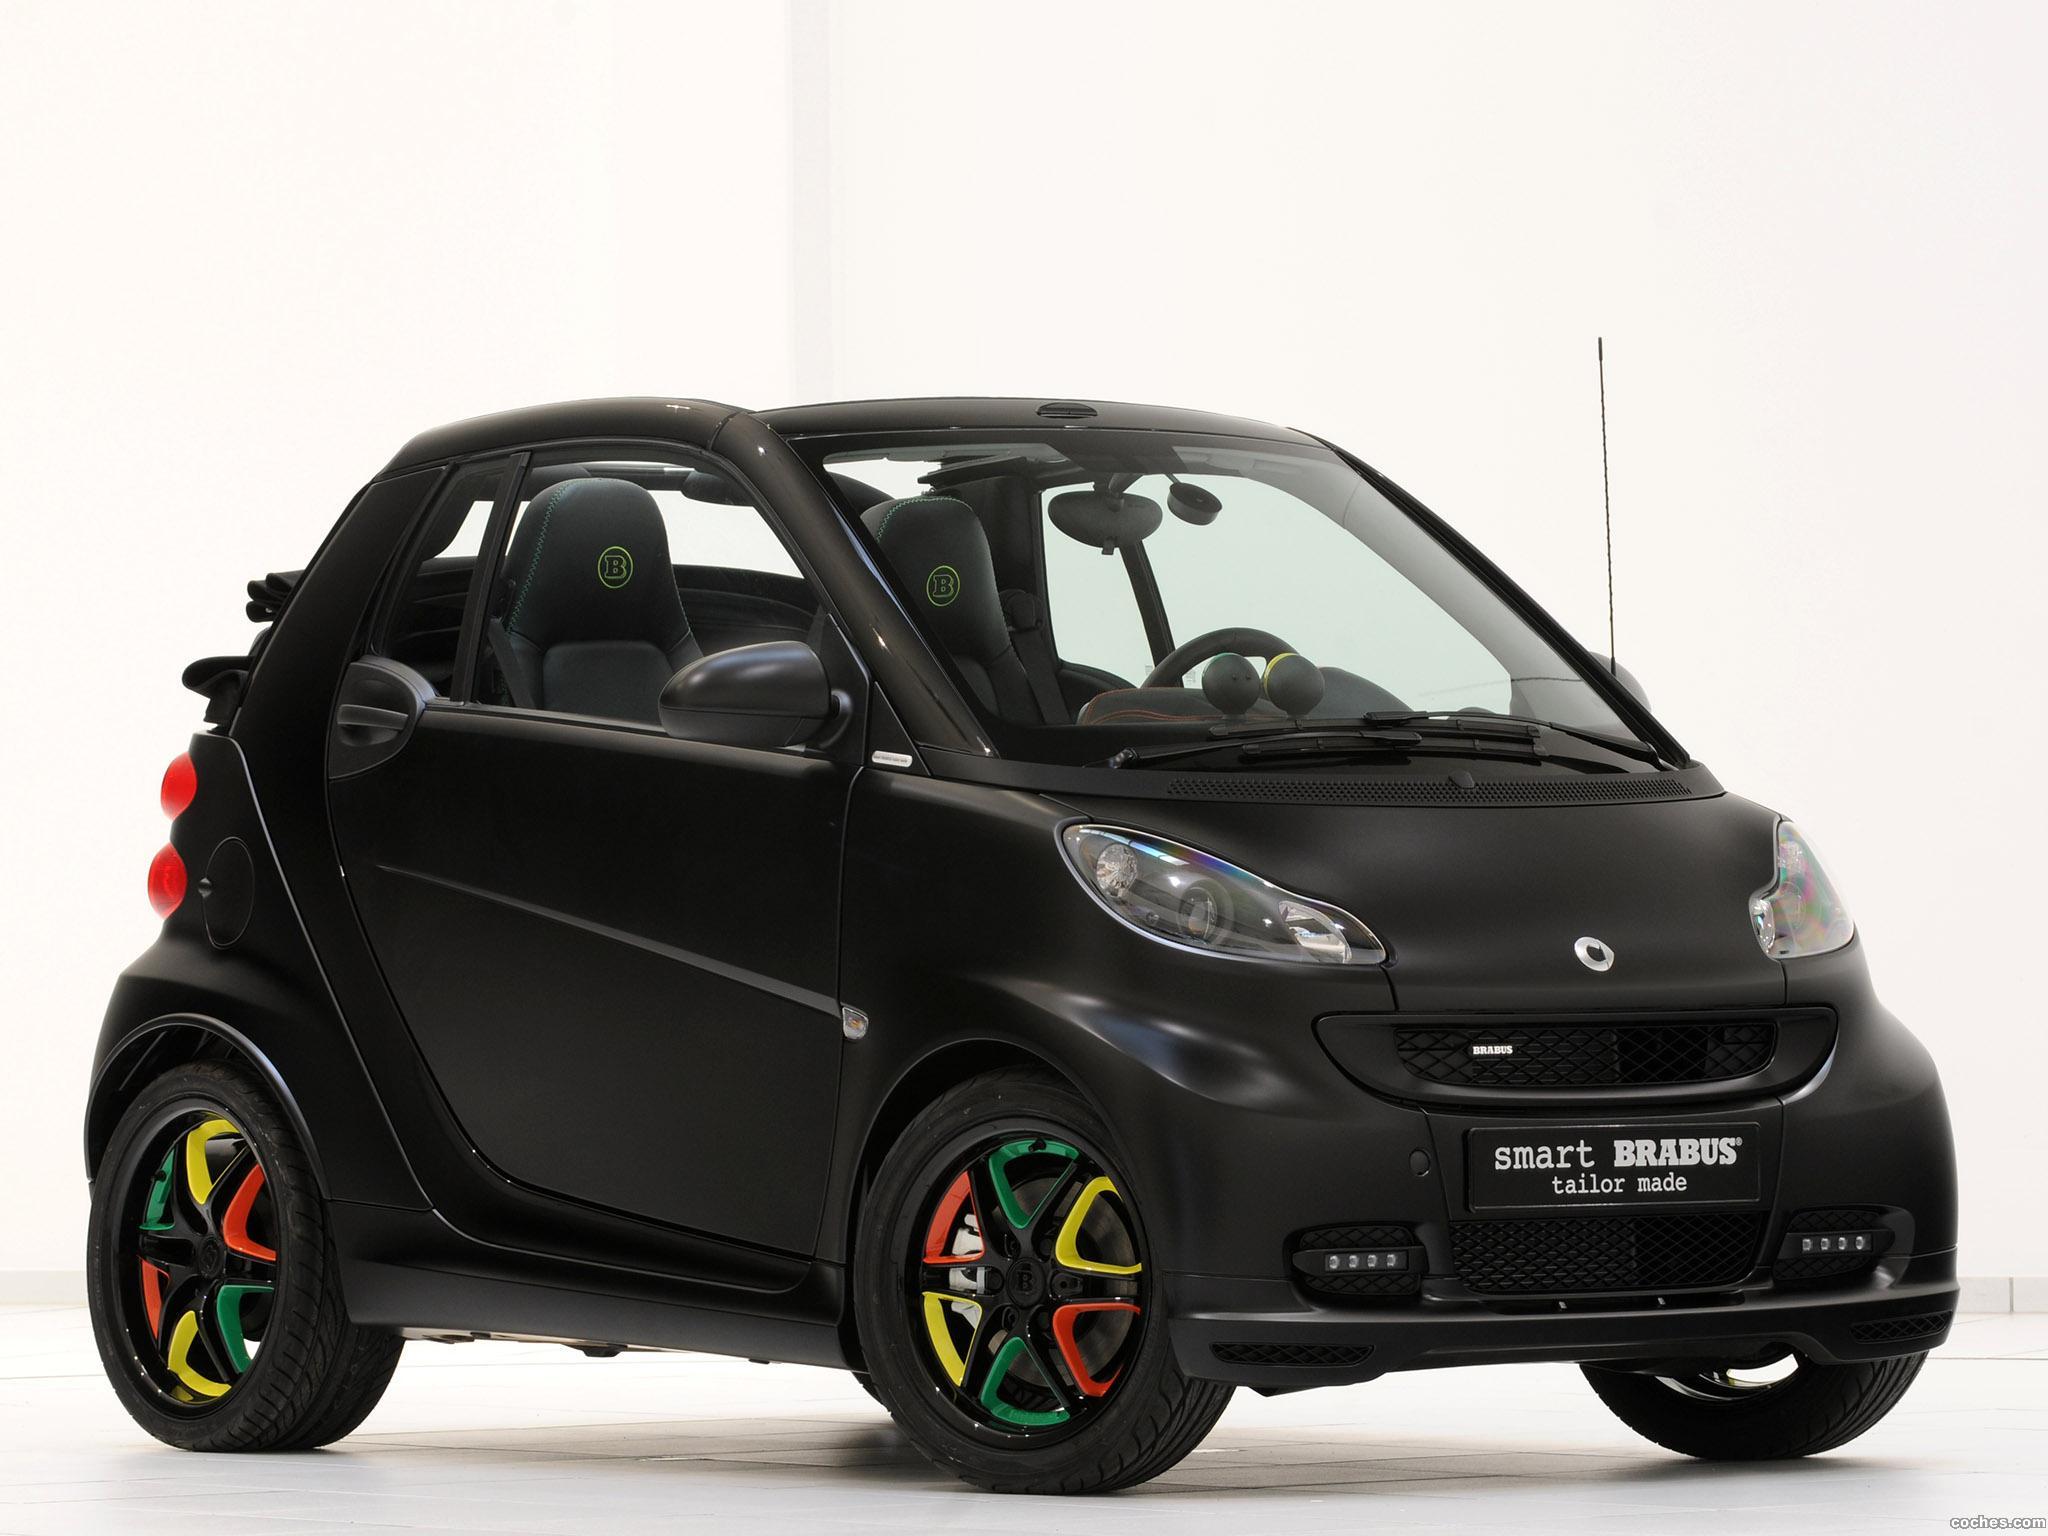 brabus_smart-for-two-tailor-made-black-2010_r5